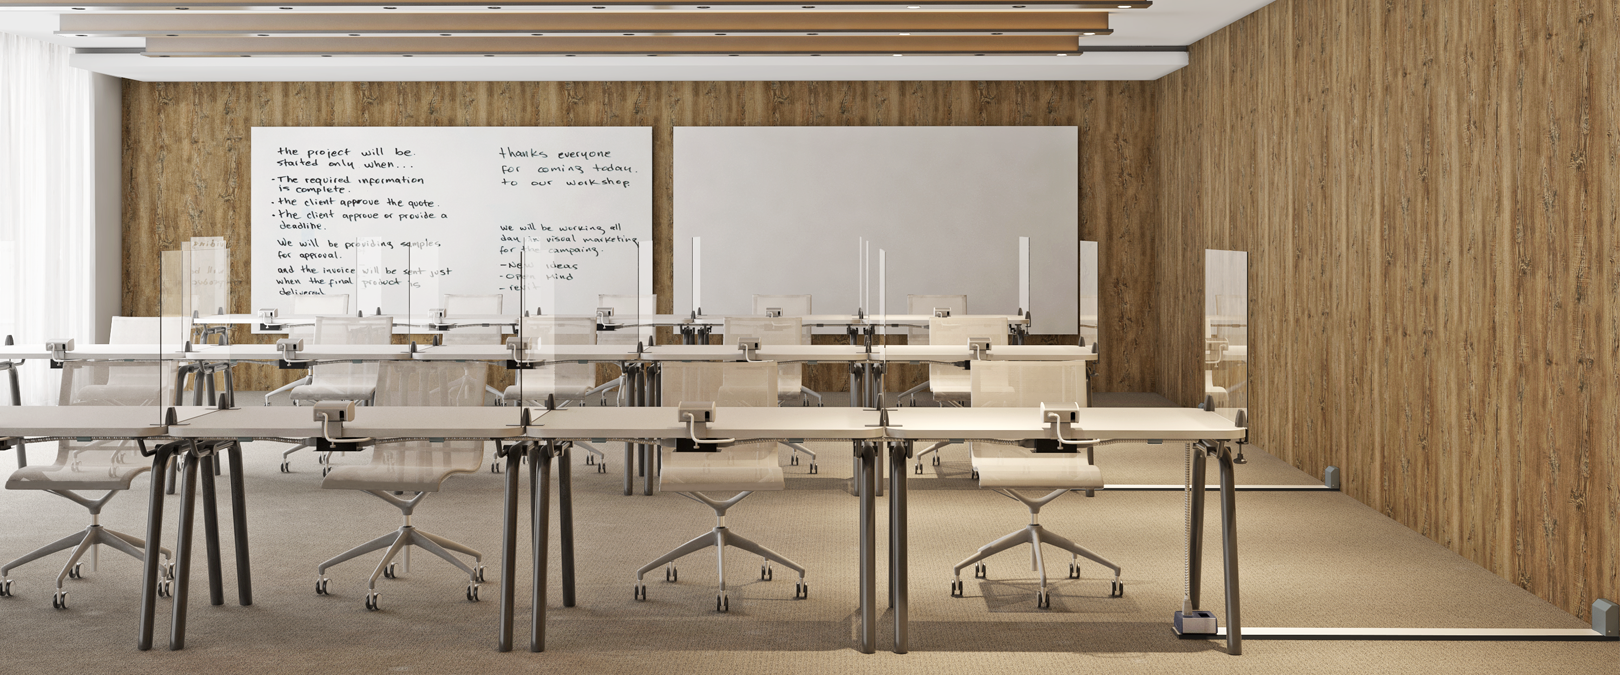 MLS-Classroom-1620x675 Challenges & Advantages of Collaborative Learning: Developing Workforce Readiness in Students - FSR, Inc. - AV Connectivity Solutions